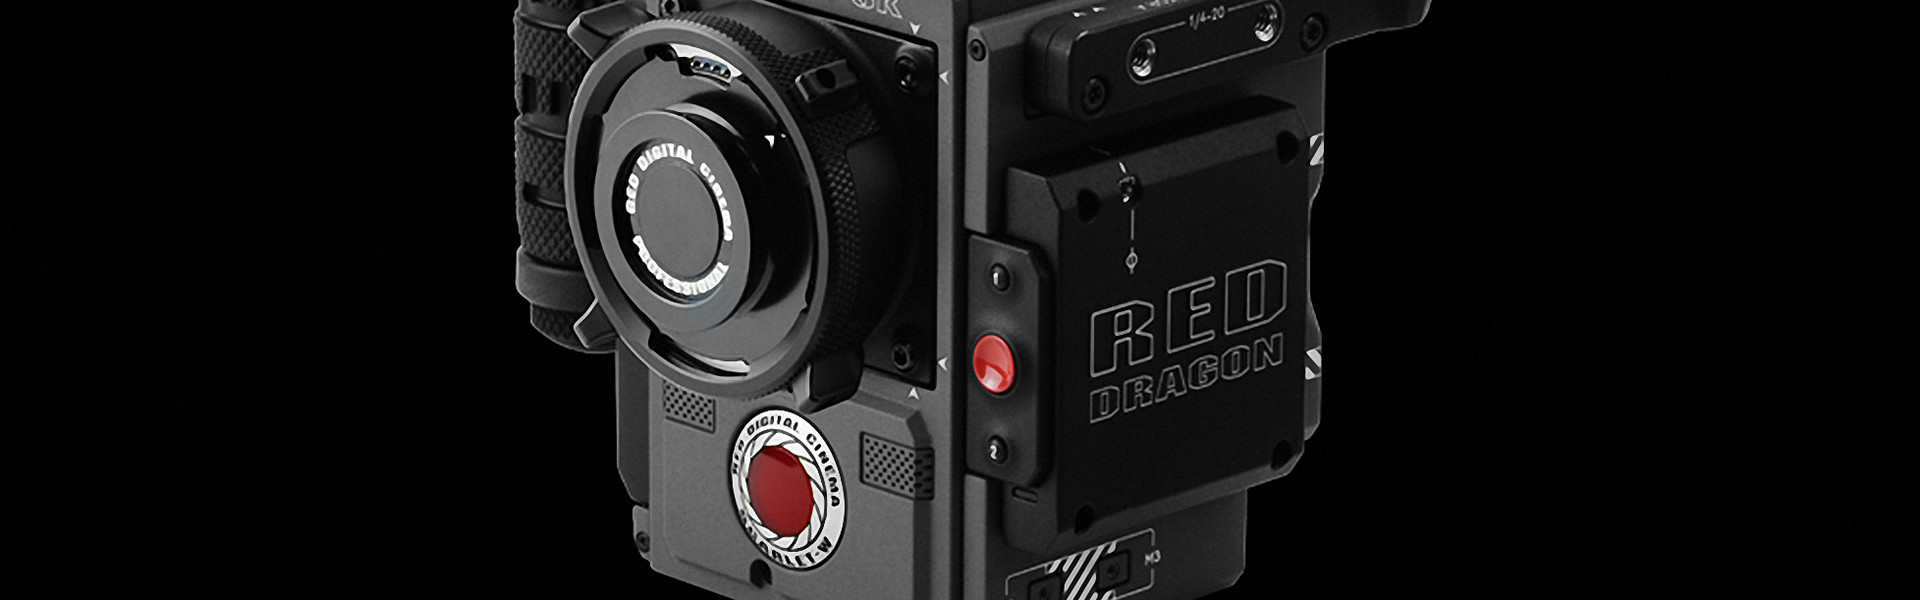 Header image for article RED Announces New SCARLET-W Camera